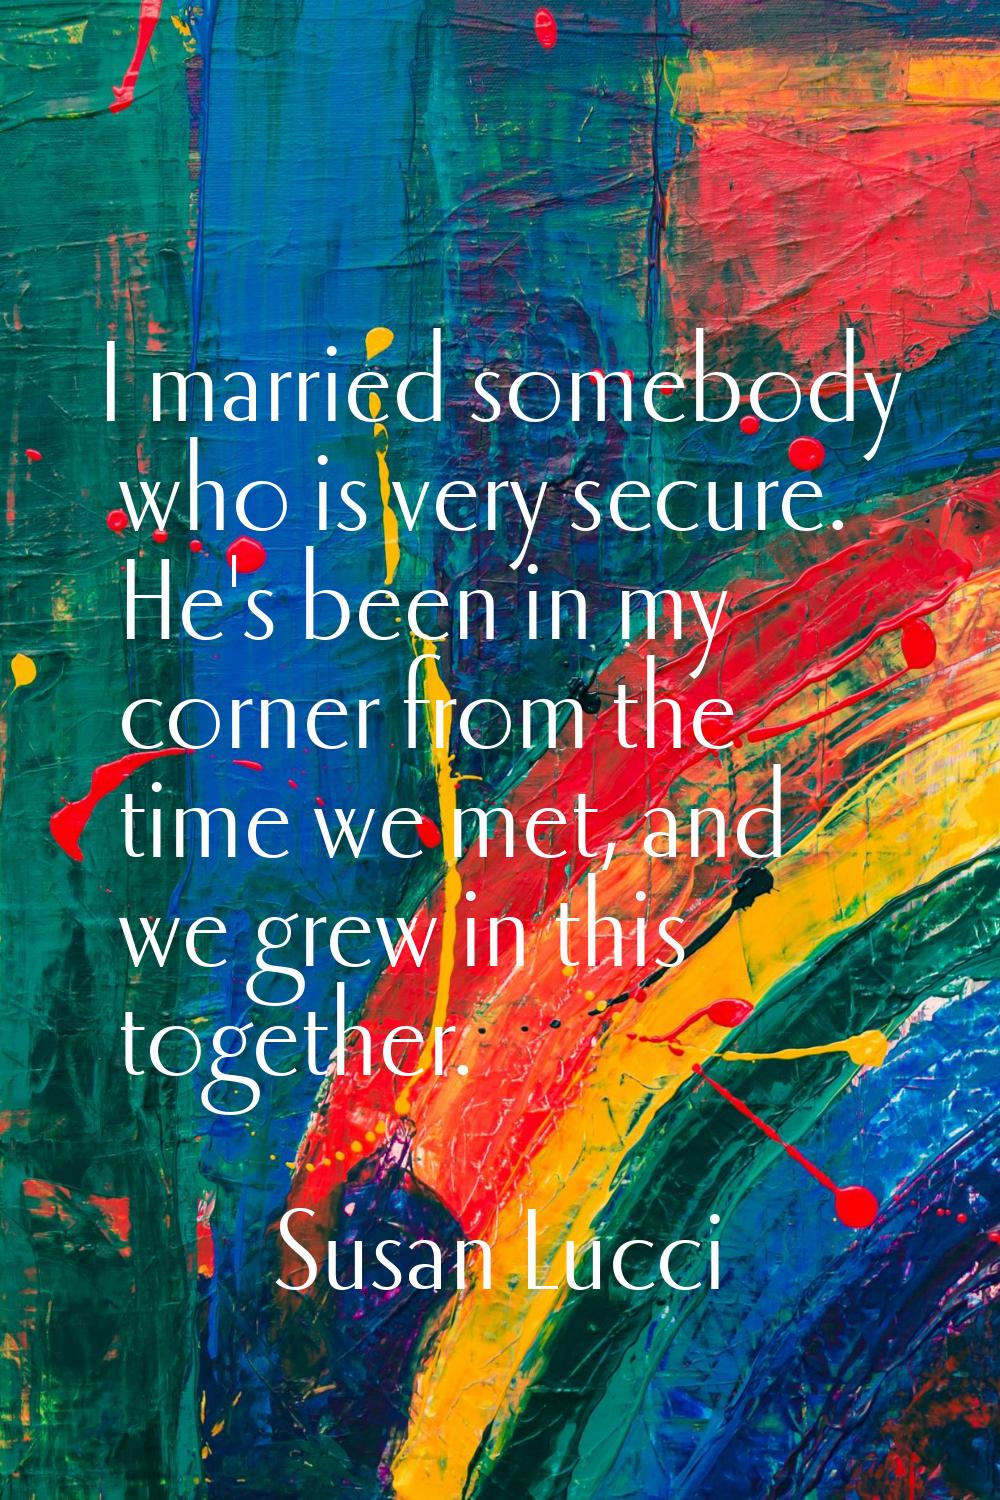 I married somebody who is very secure. He's been in my corner from the time we met, and we grew in 